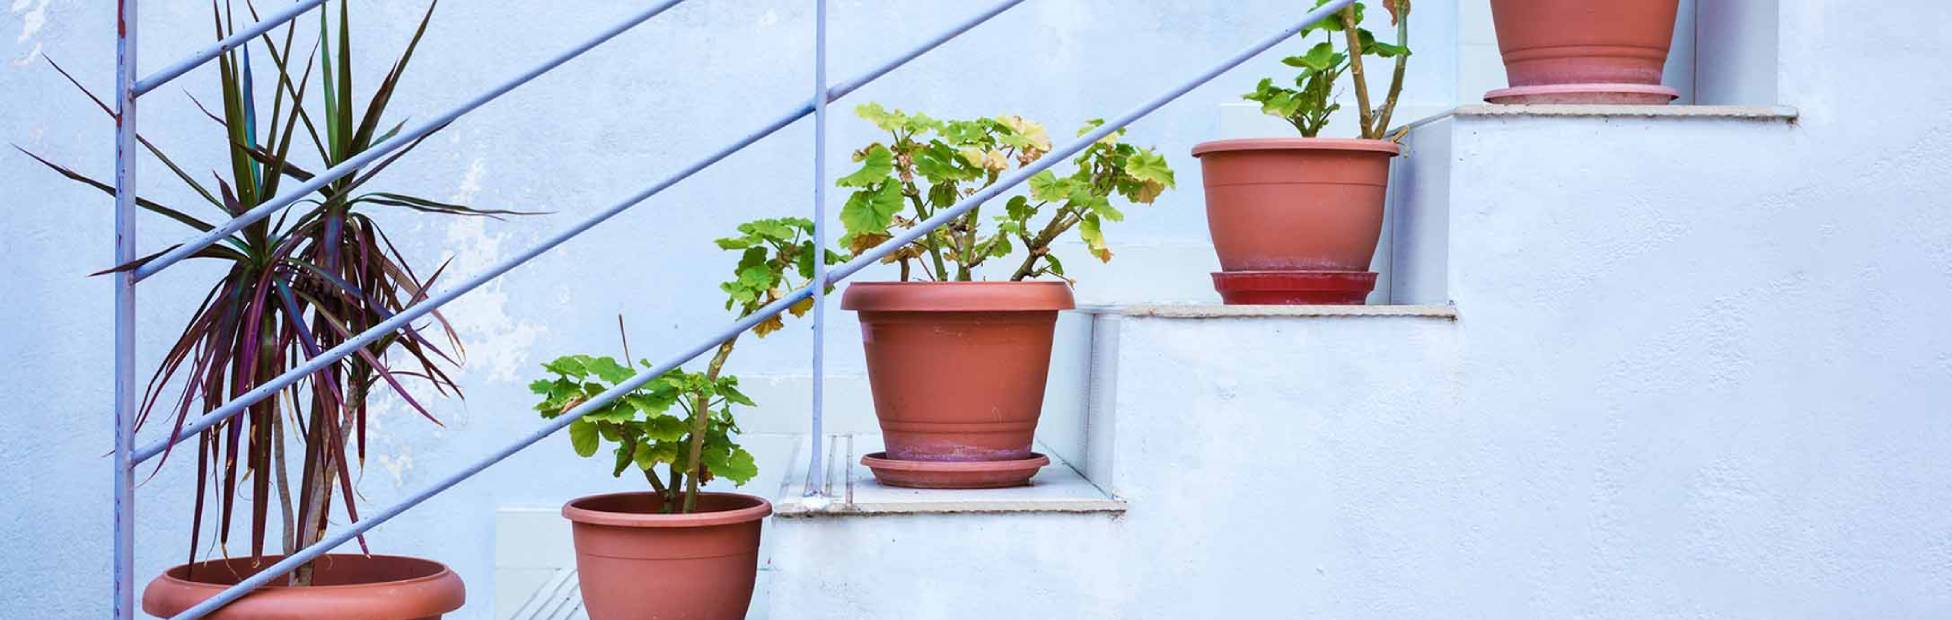 A picture showing 5 pots of plants, one on each step of a staircase.